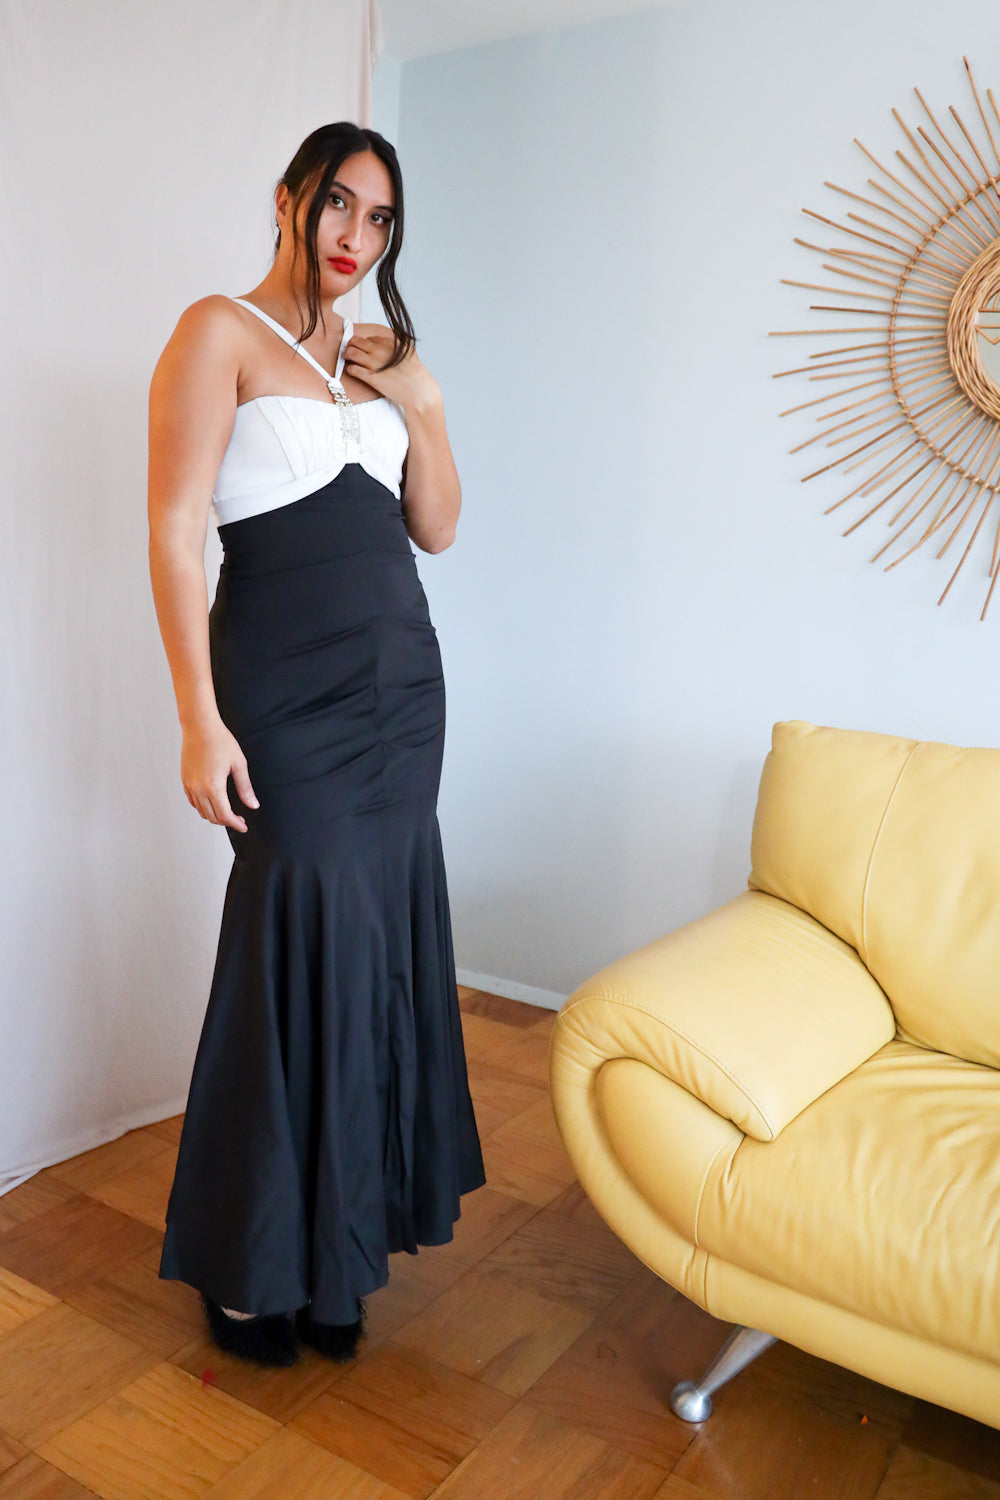 90s Fishtail Gown in Black and White / Size 8